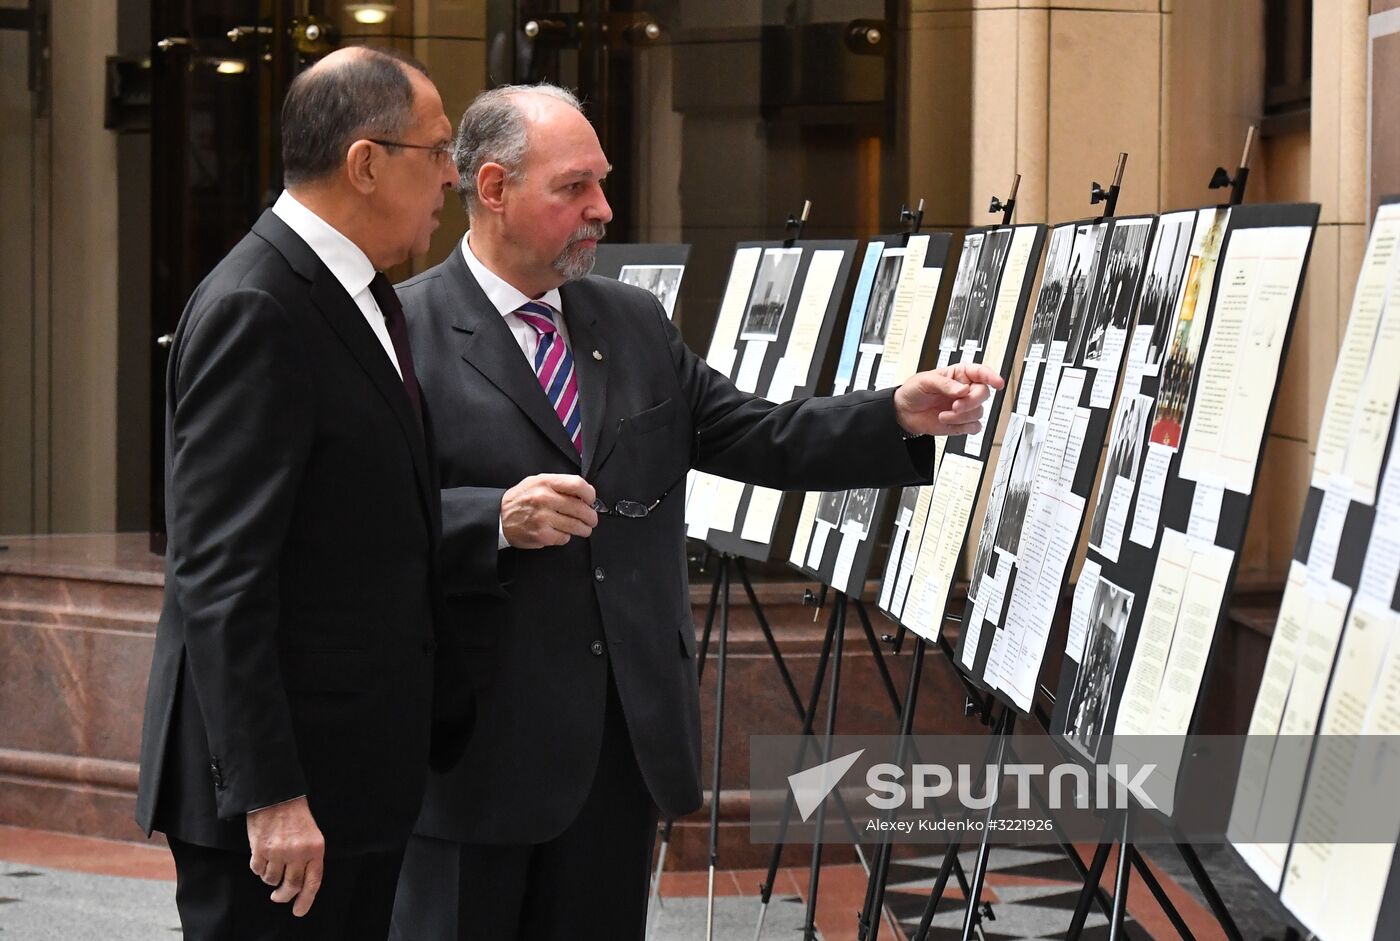 Exhibition of Russian and Argentine foreign ministries' archives opens